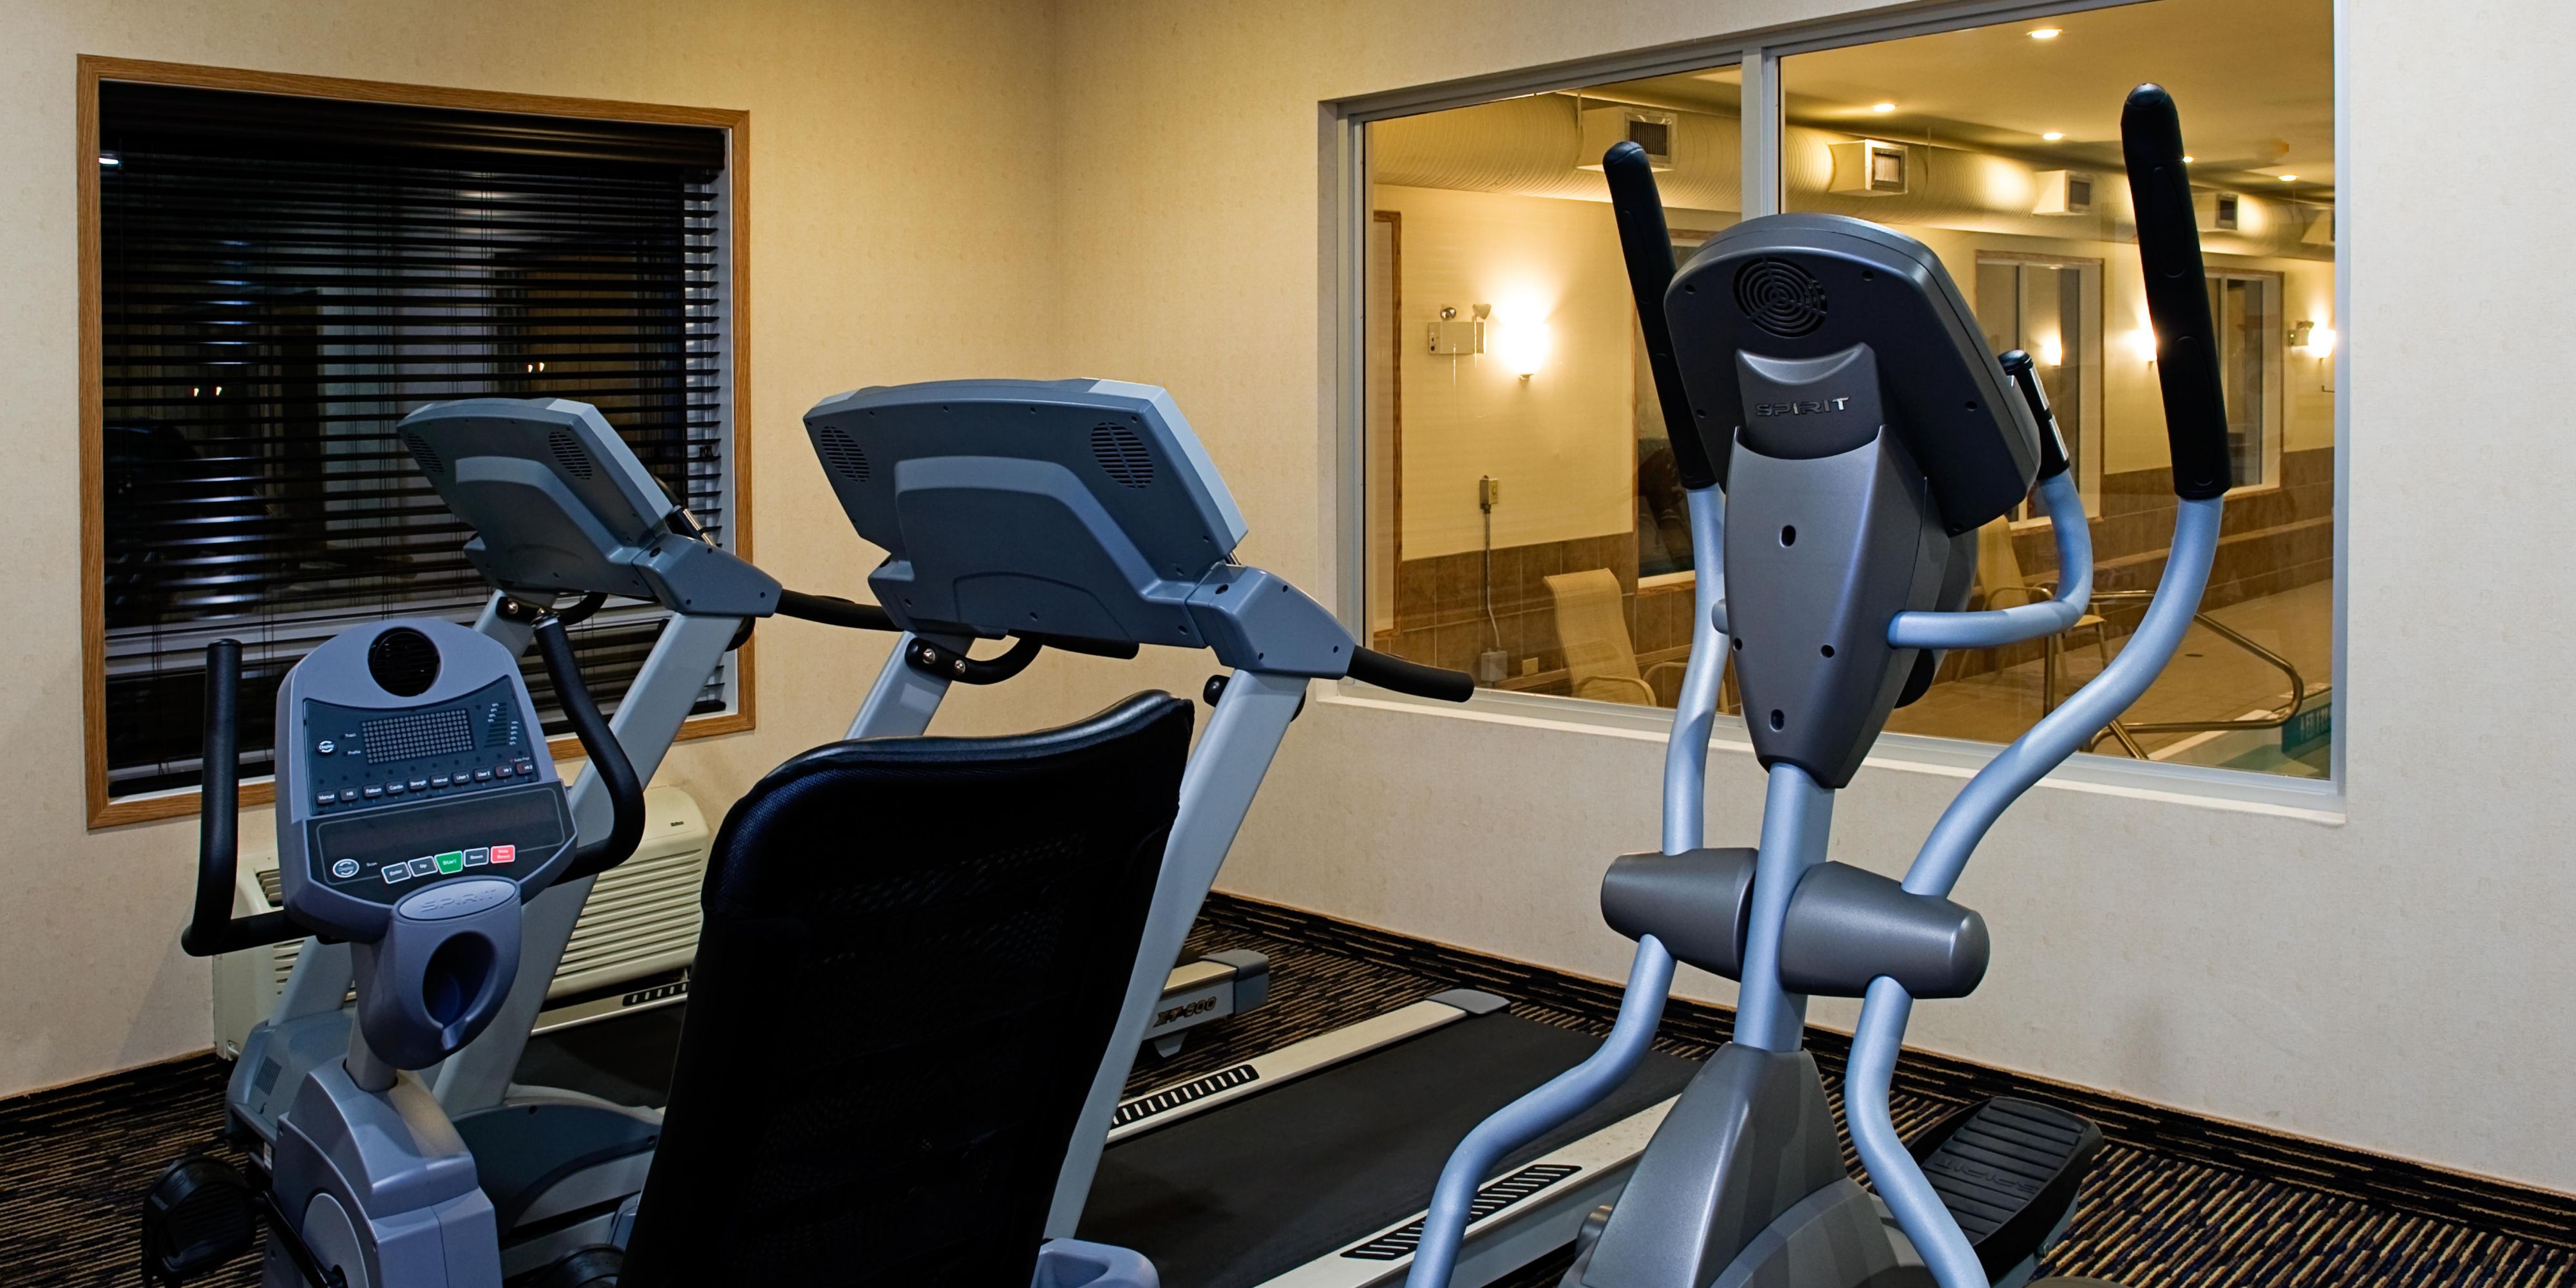 Fitness Centre is open 24 hours. Includes a Treadmill, Bike and Elliptical Trainer. 

